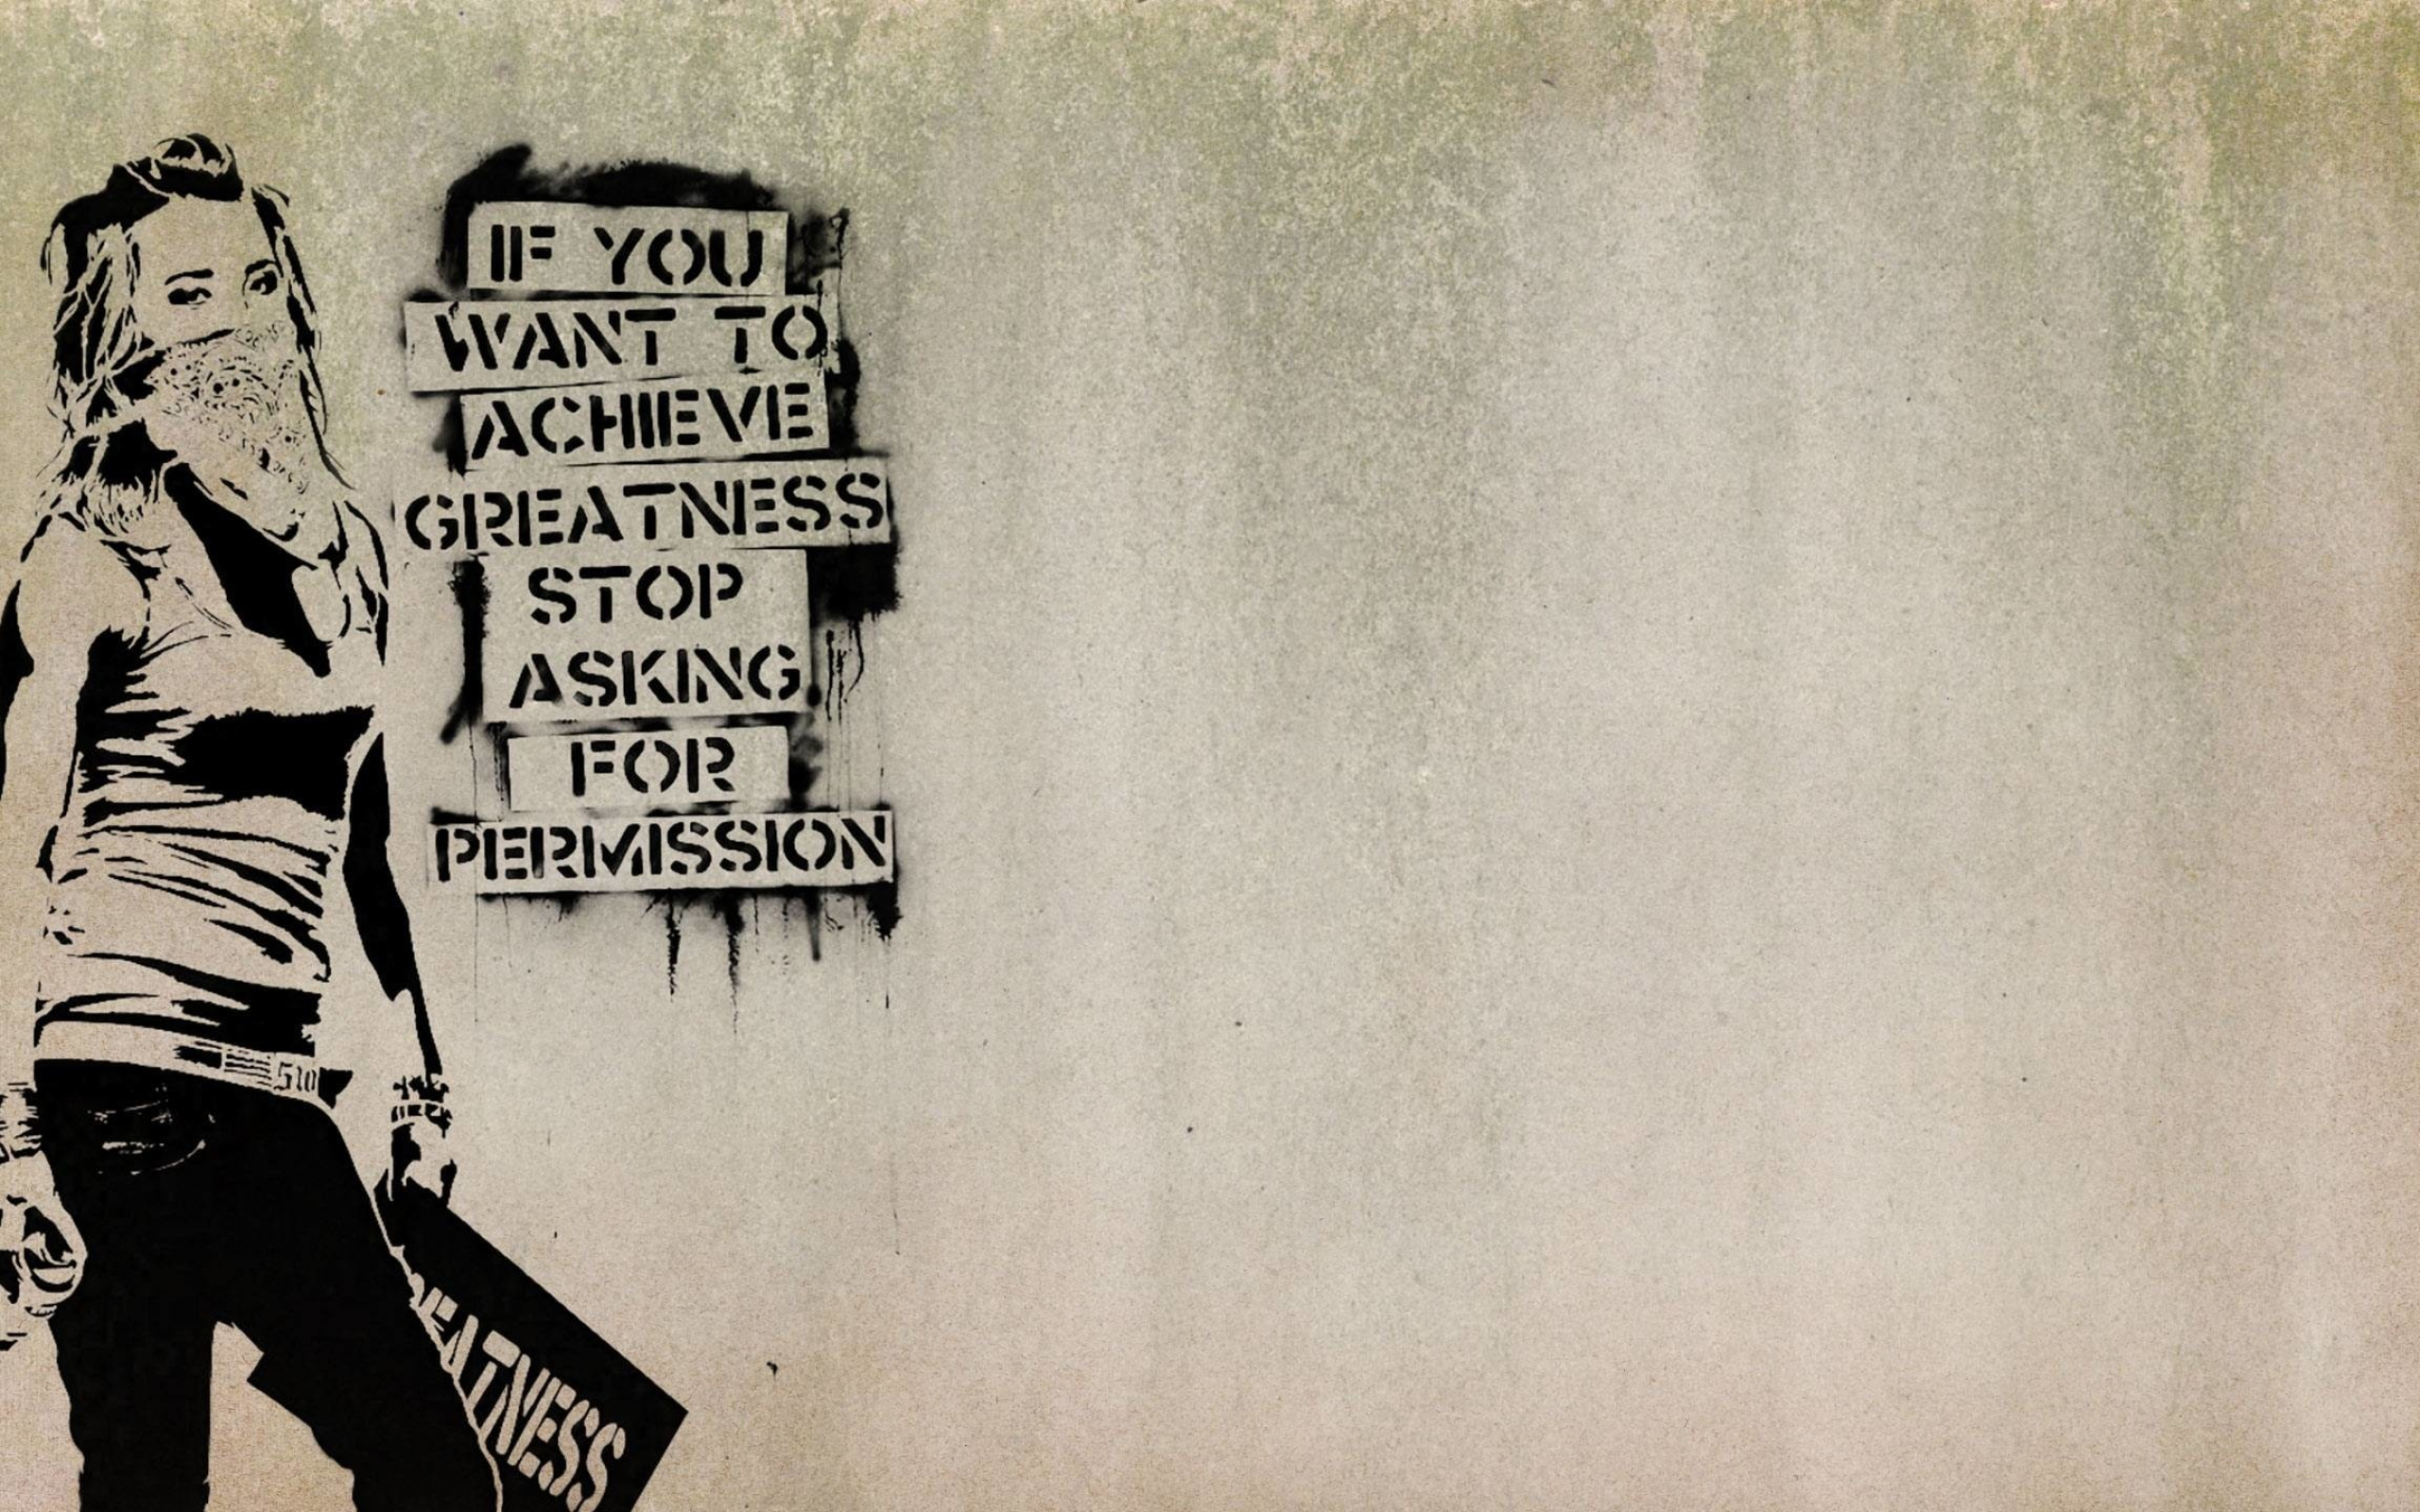 Banksy: An activist, provocative, anti-capitalist and mysterious street artist. 2560x1600 HD Background.